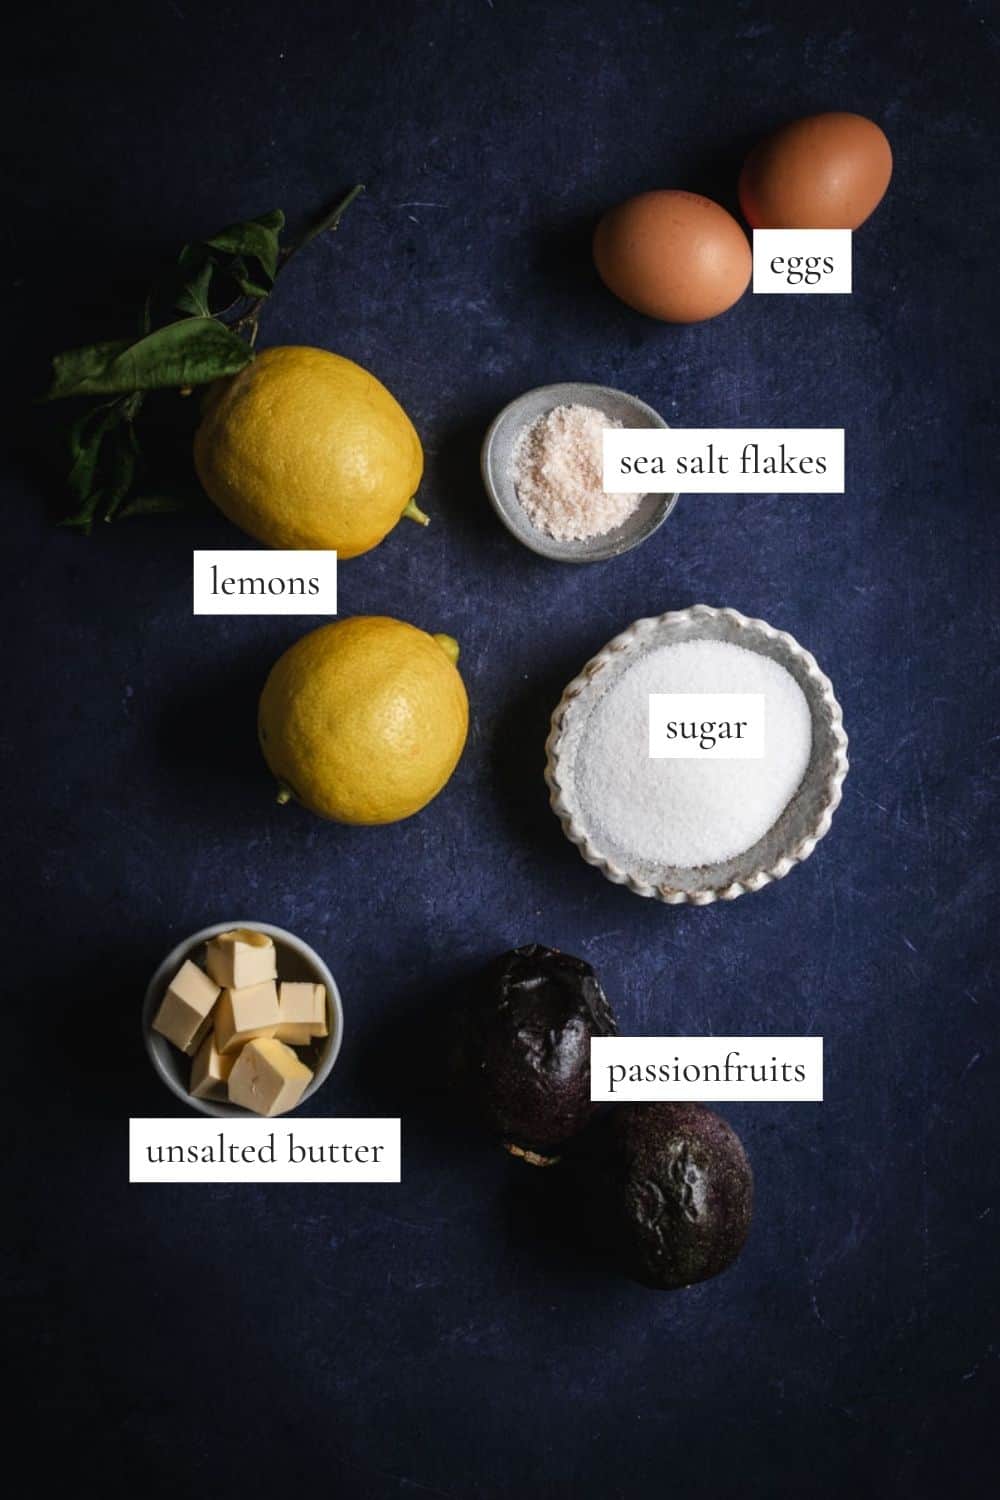 All the ingredients you need to make a jar of lemon and passionfruit curd.